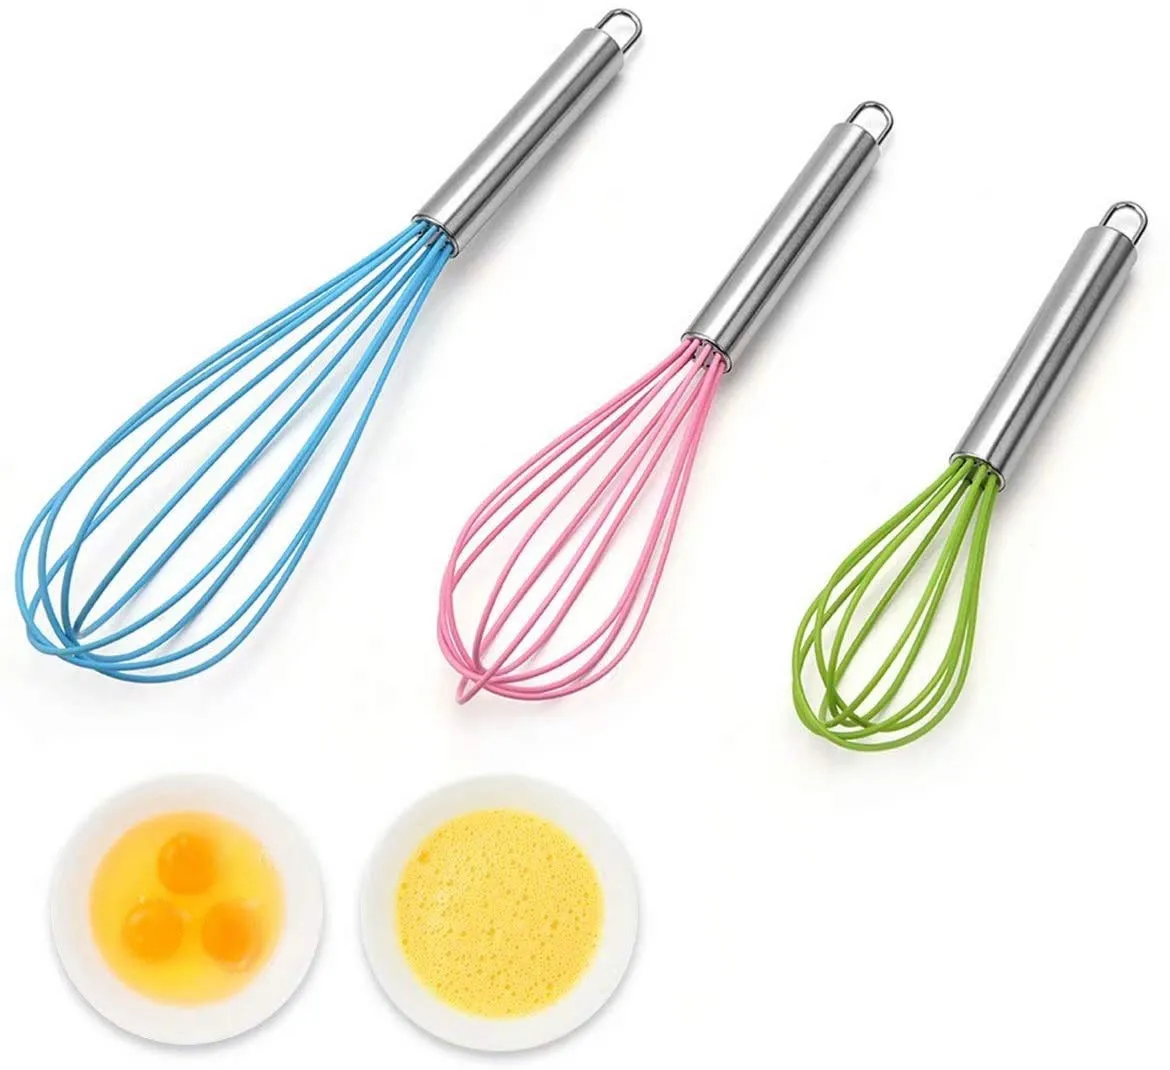 Silicone Whisk Stainless Handle Wisk Kitchen Tool, Sturdy Balloon Egg Beater Whisks for Cooking, Blending, Beating, Stirring Sma